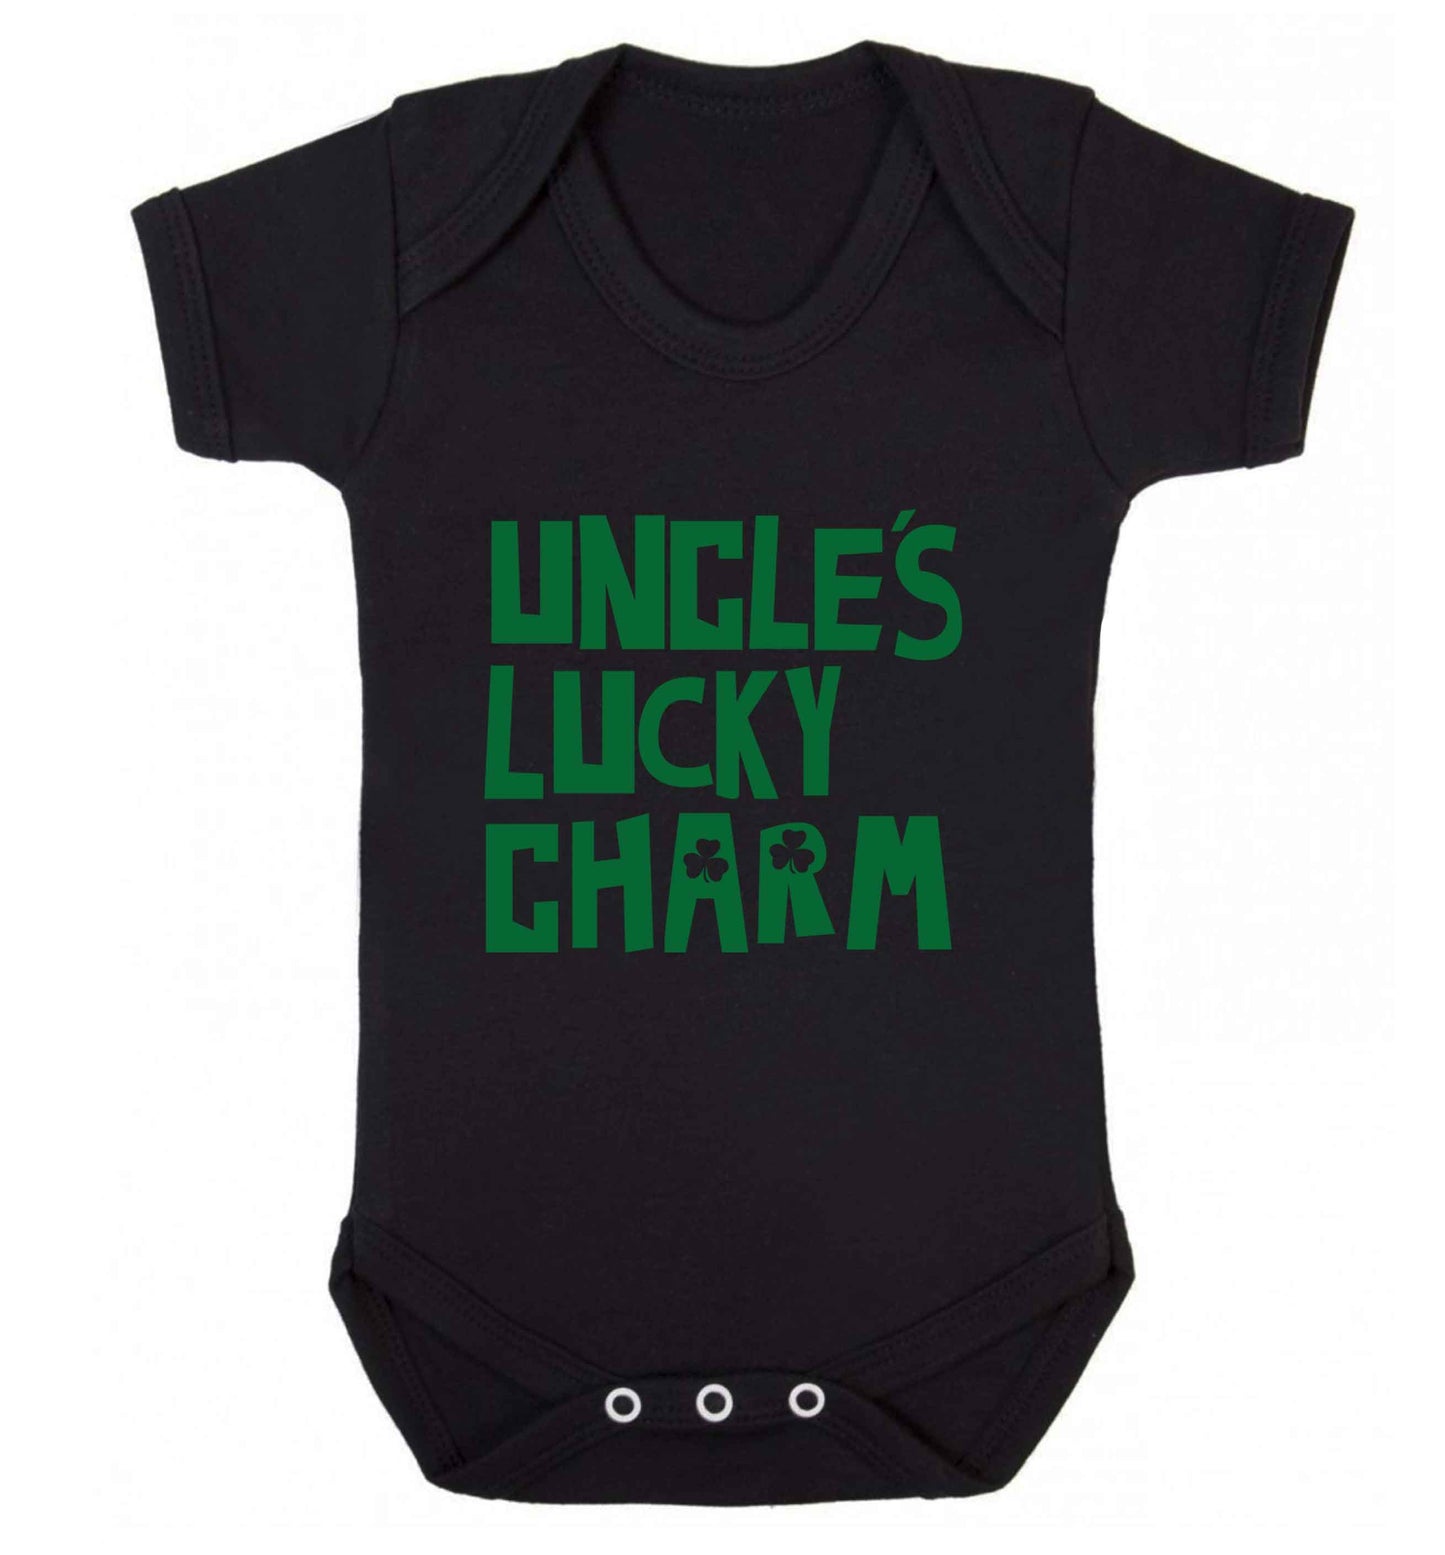 Uncles lucky charm baby vest black 18-24 months